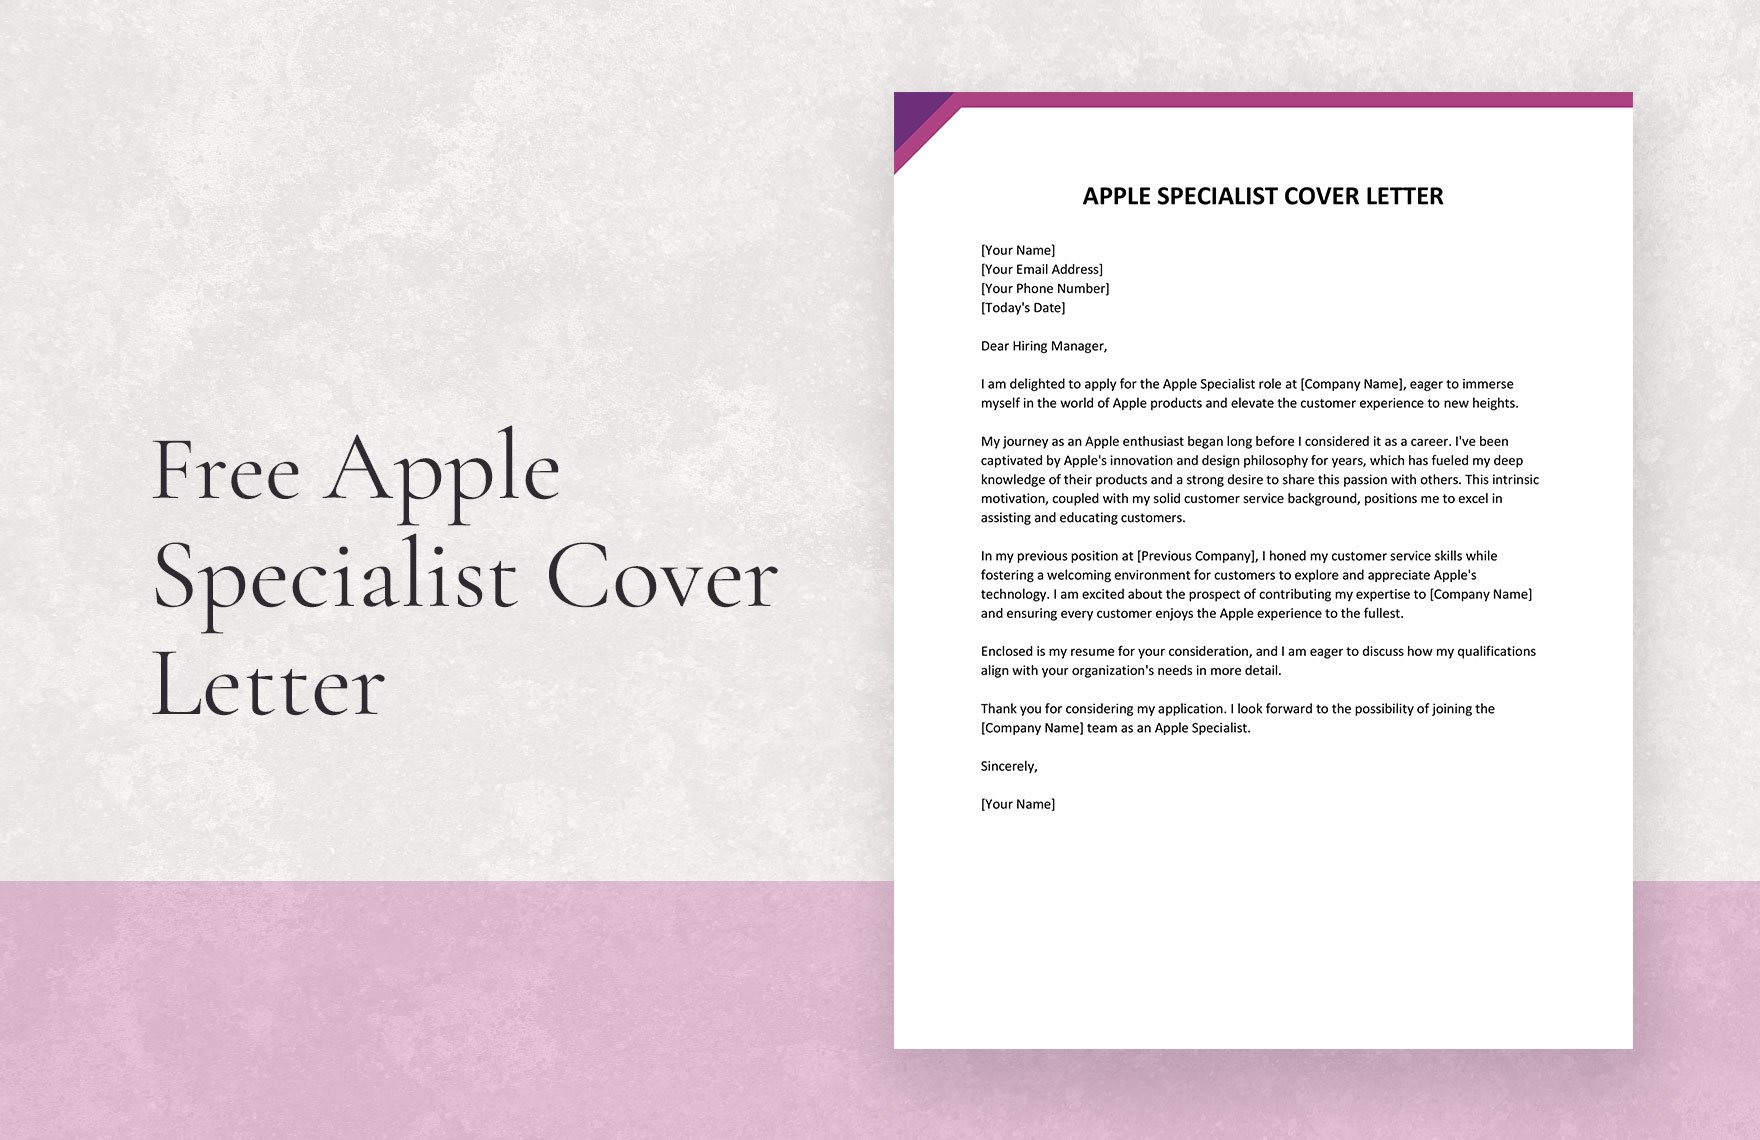 Apple Specialist Cover Letter in Word, Google Docs